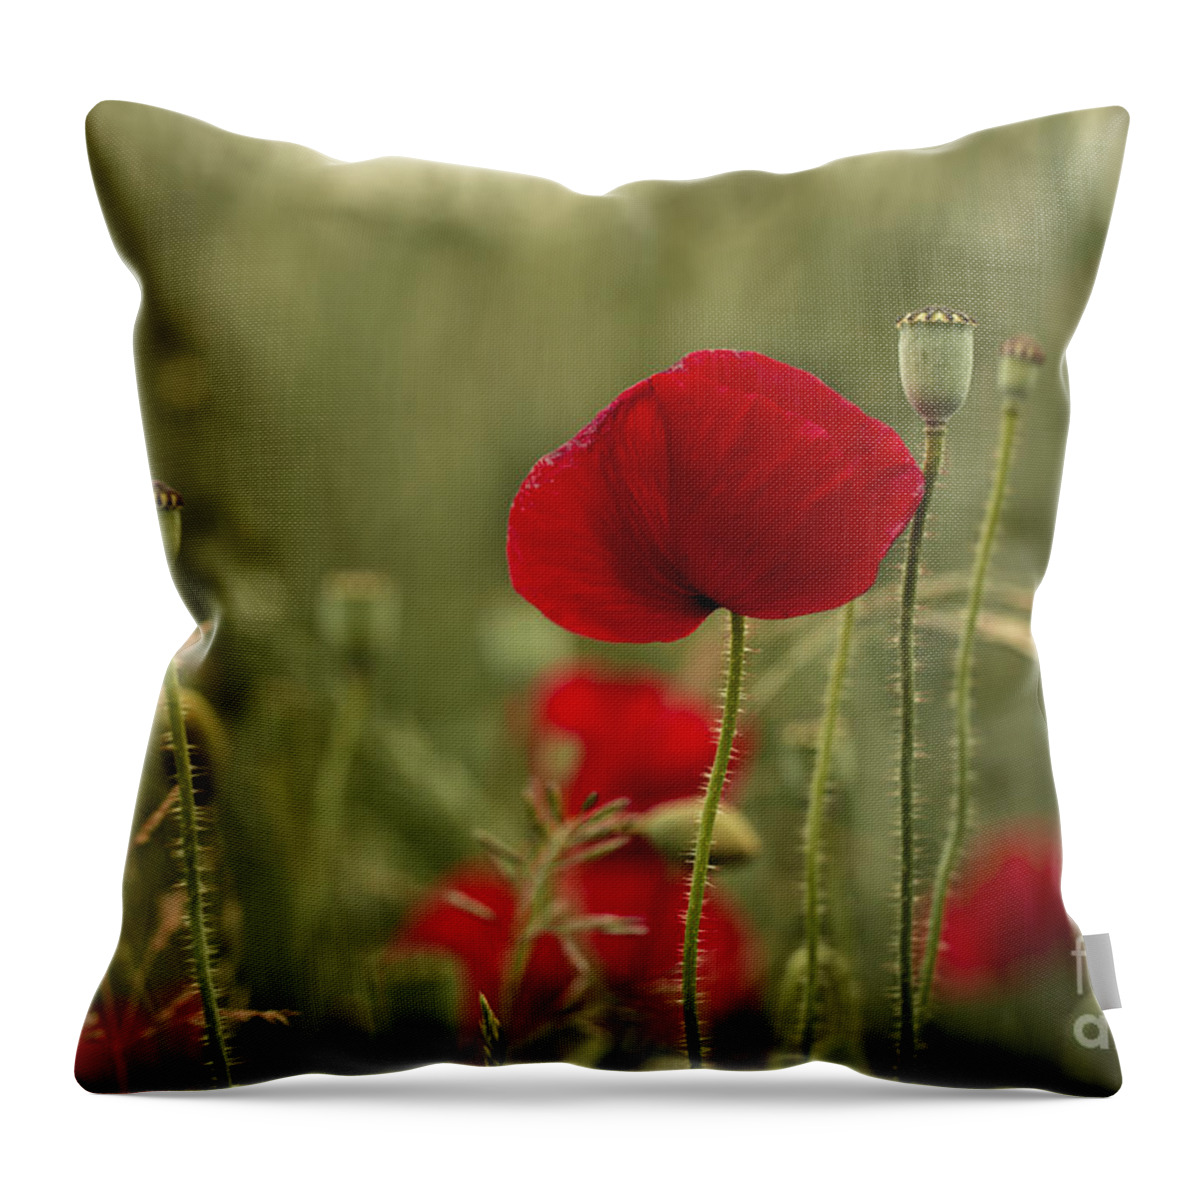 Poppy Throw Pillow featuring the photograph Red Poppy Flowers by Nailia Schwarz